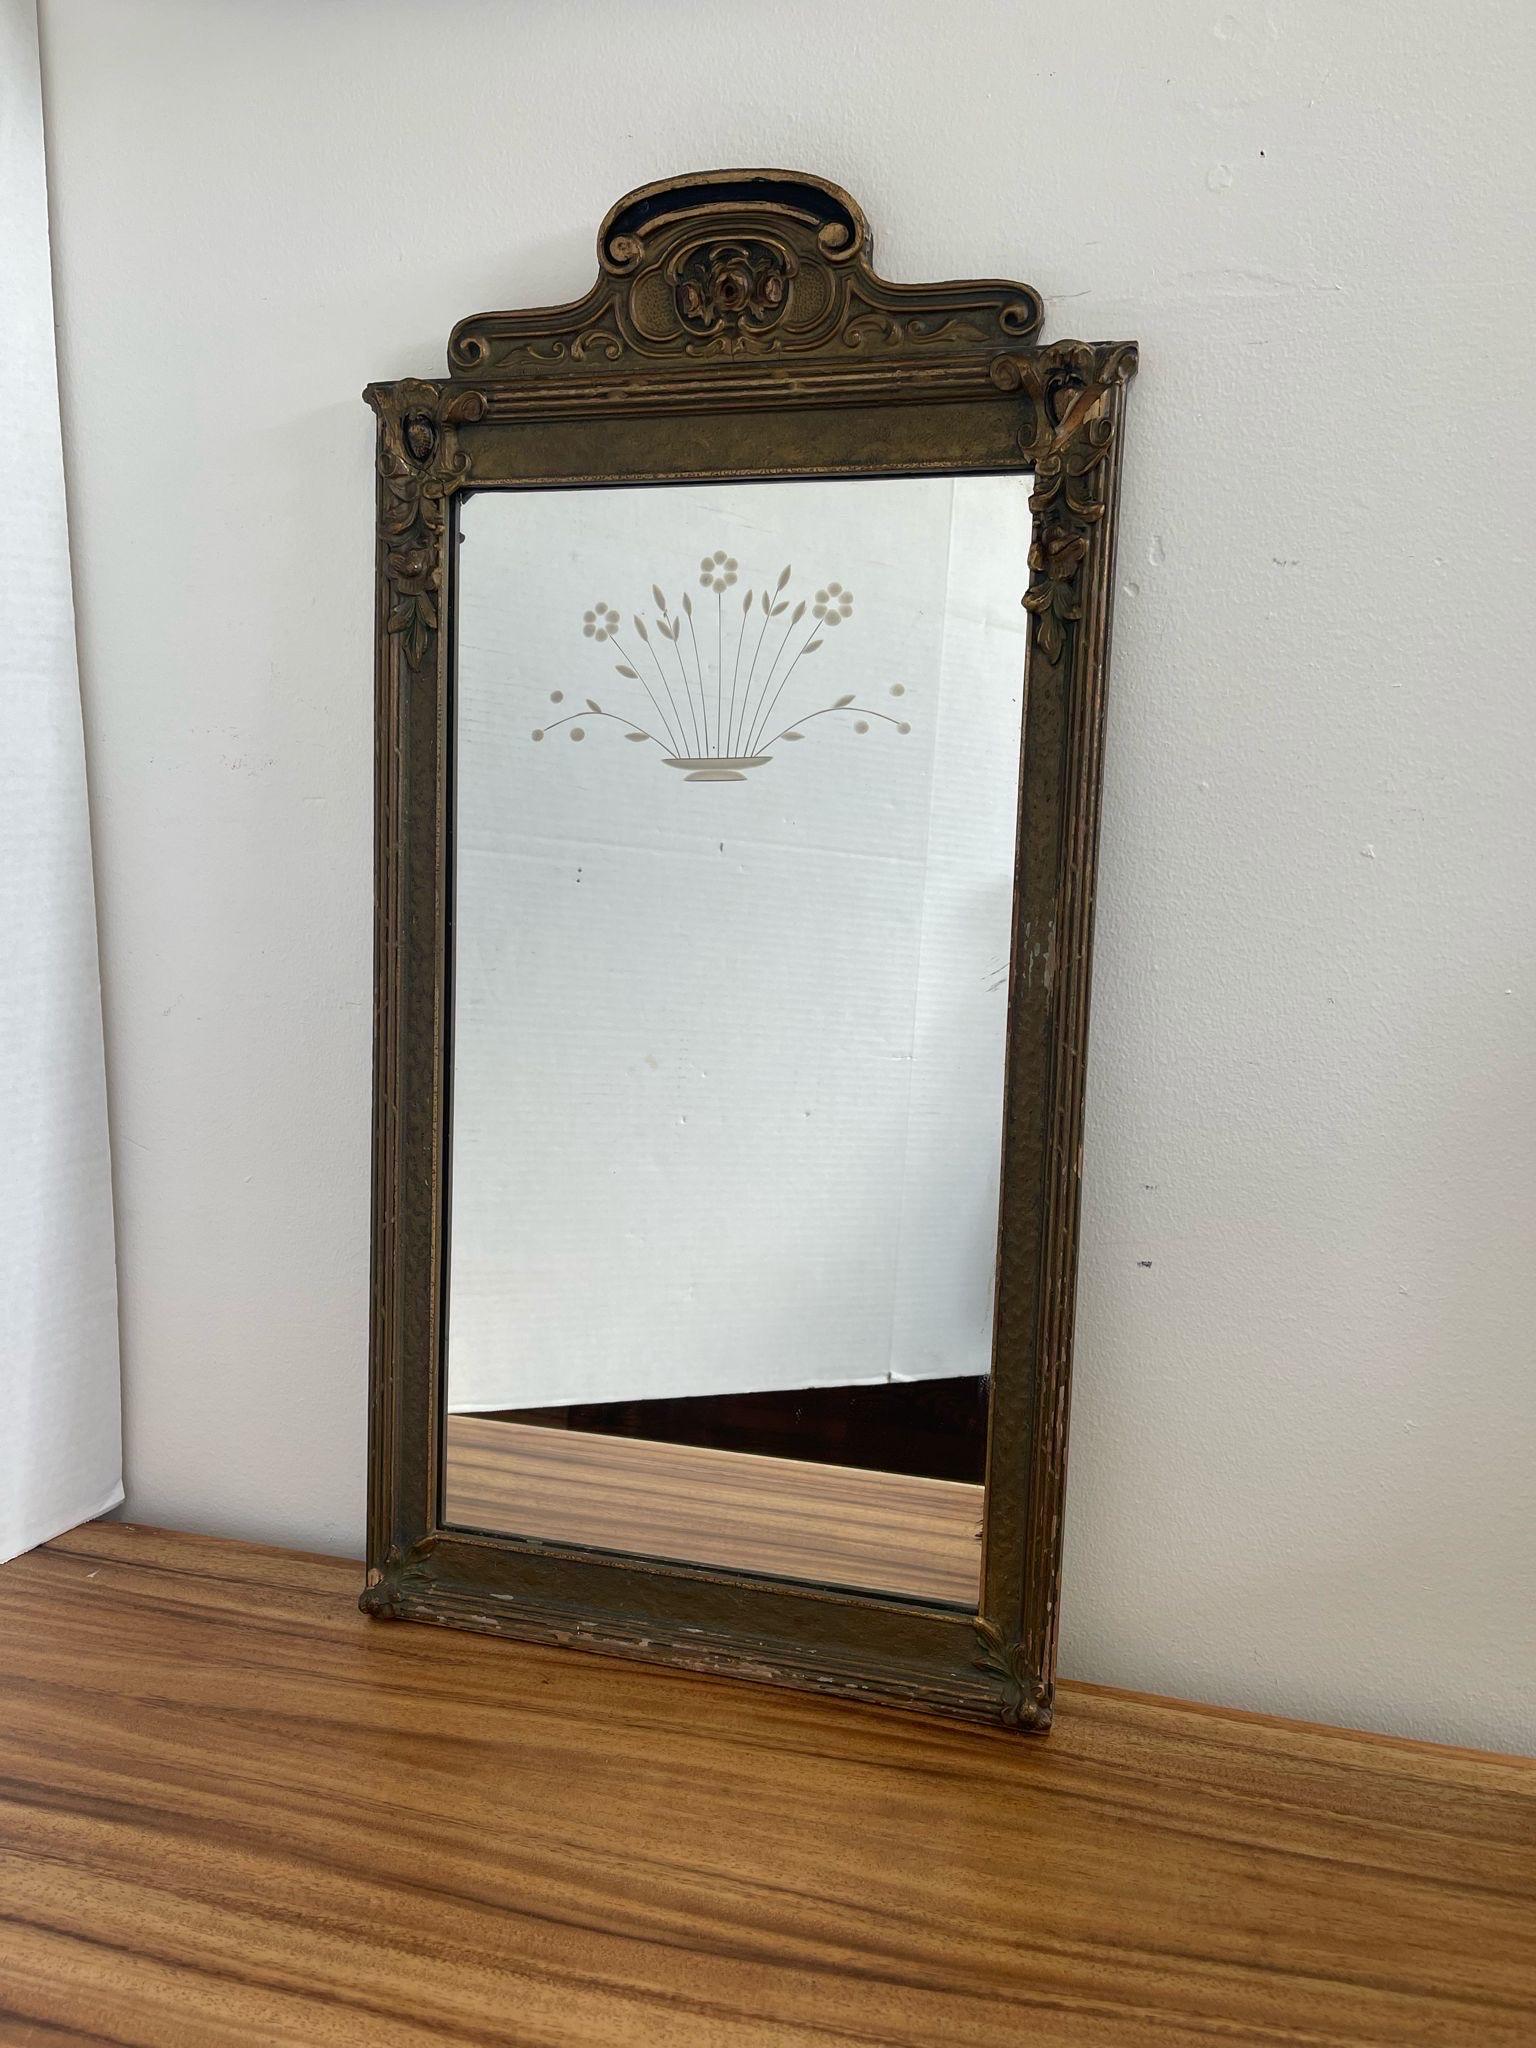 Ornate detailing on the wooden frame with arched top. Beautiful Petina and Aging to the frame and Mirror. Possibly circa1920. No Makers mark. Vintage Condition Consistent with Age as Pictured.

Dimensions. 14 W ; 1 D ; 29 H